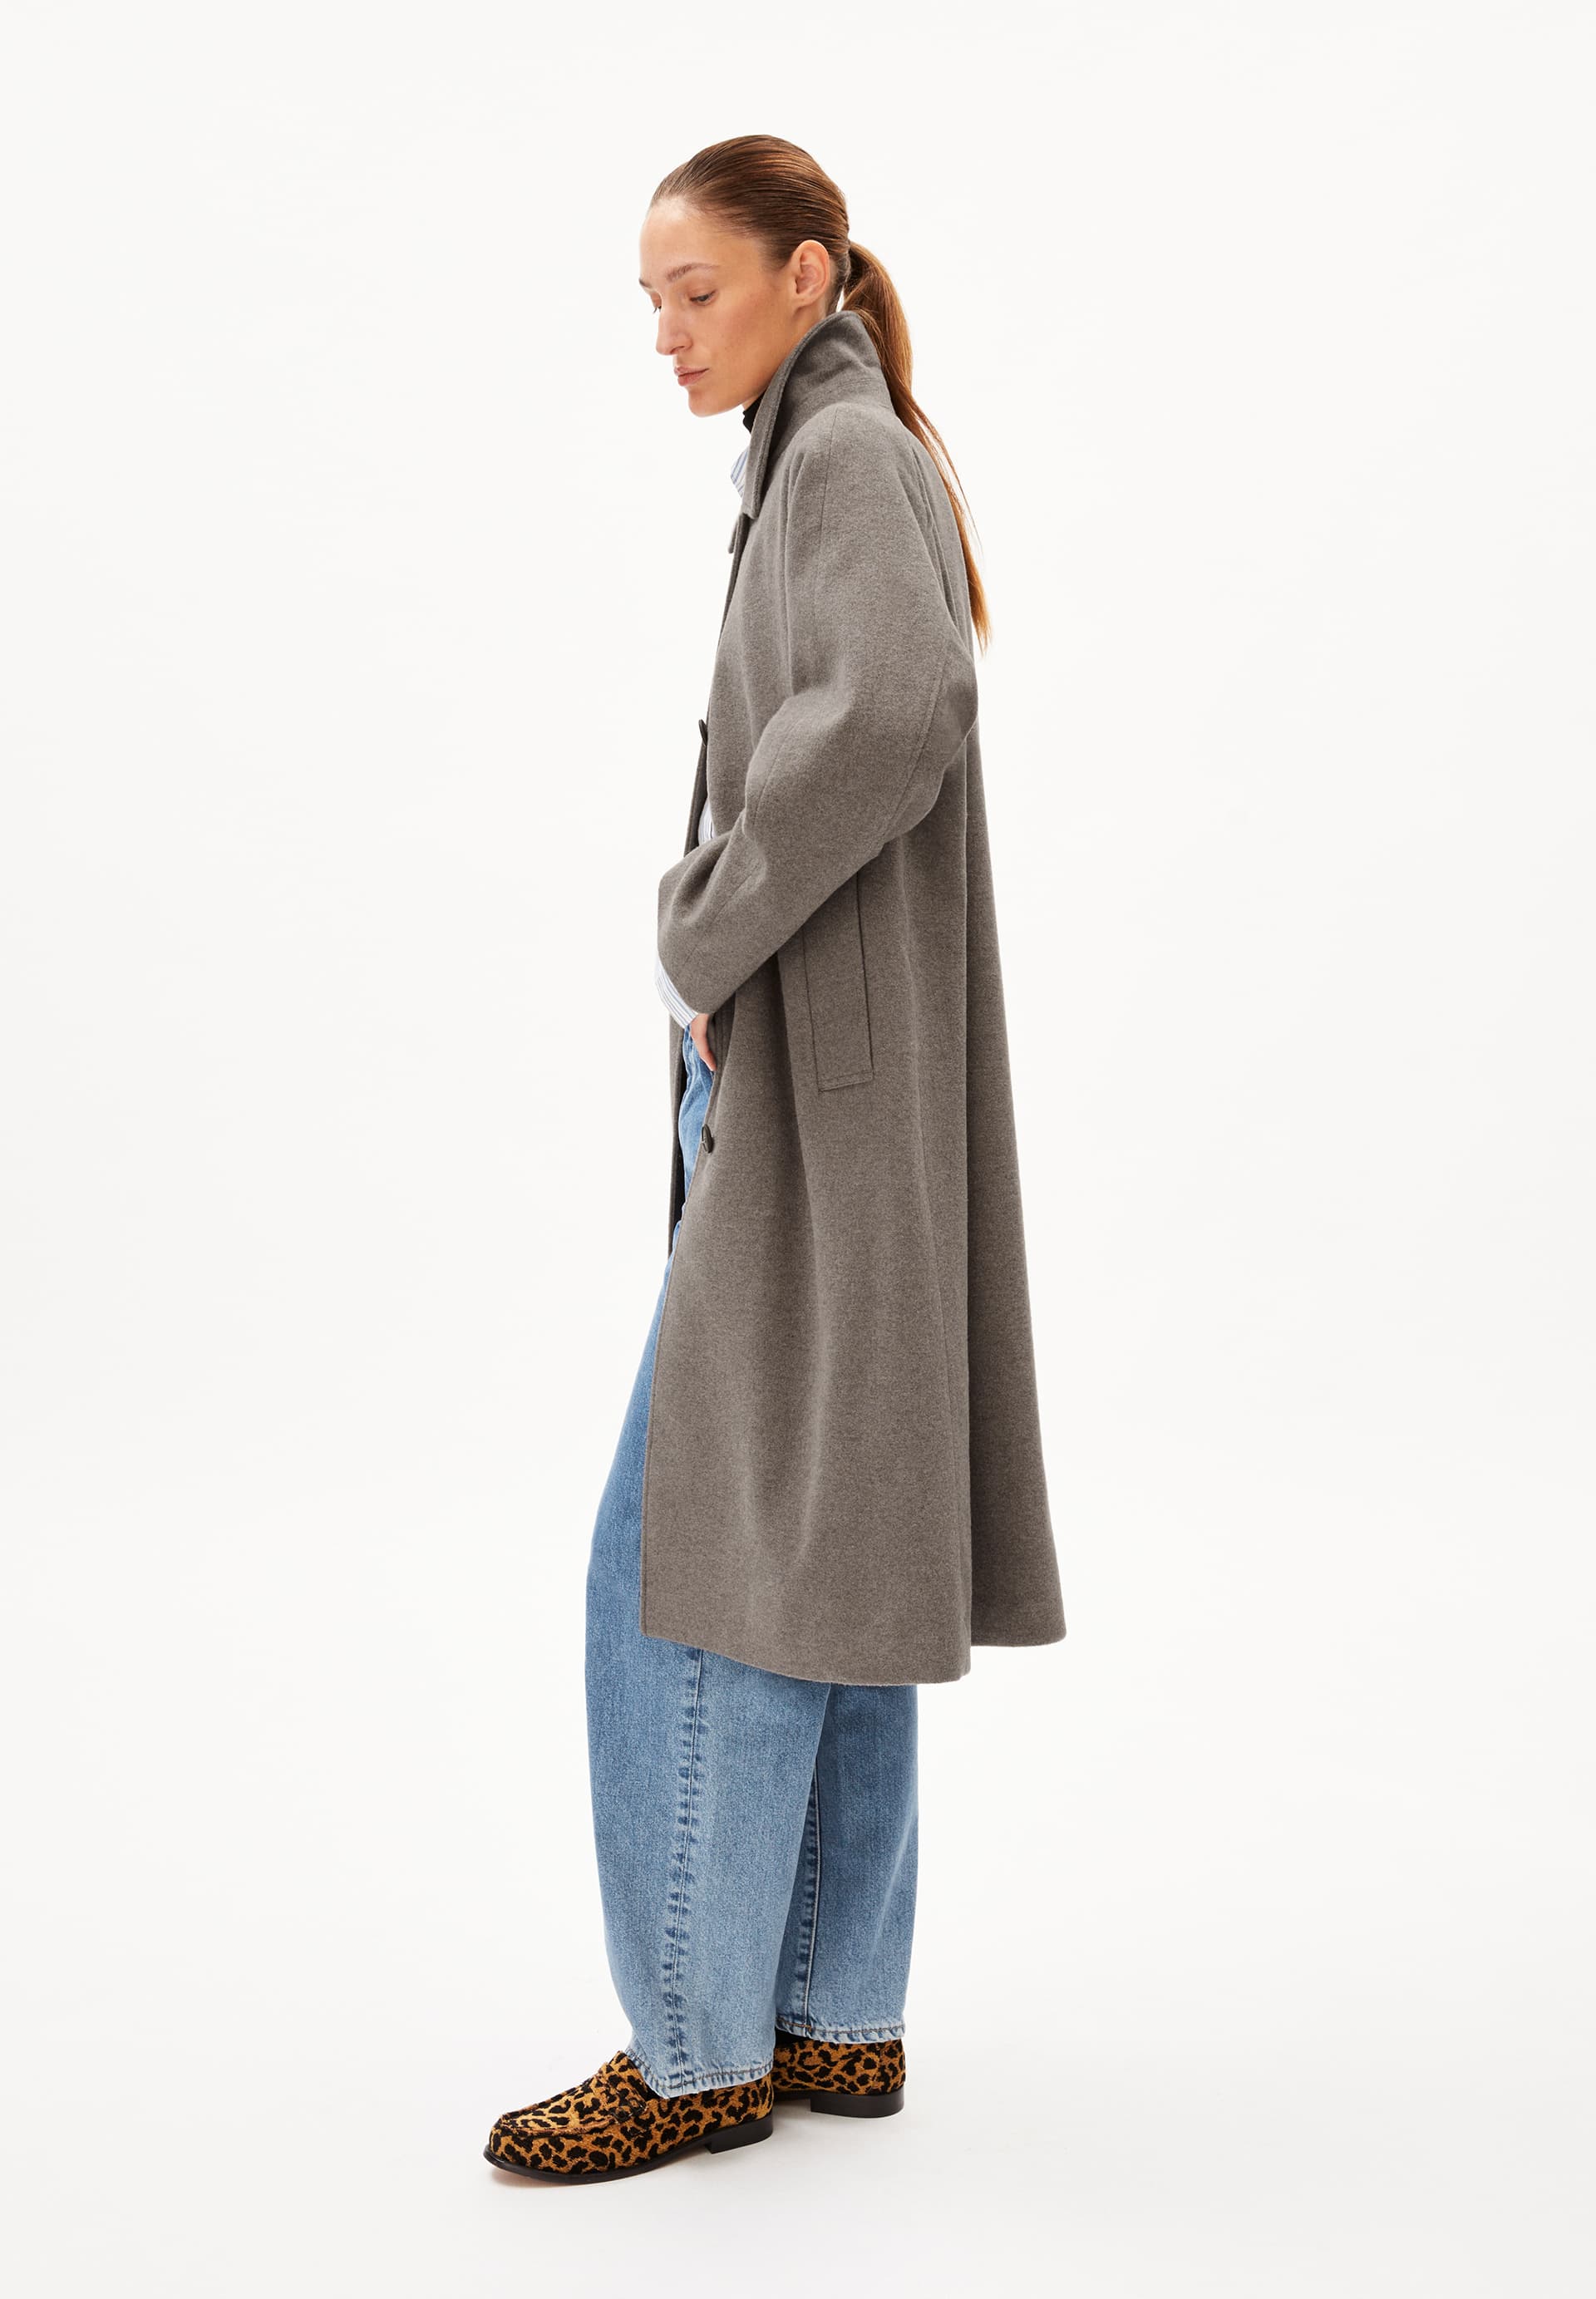 VAANOISE WOOL Coat Relaxed Fit made of recycled Wool